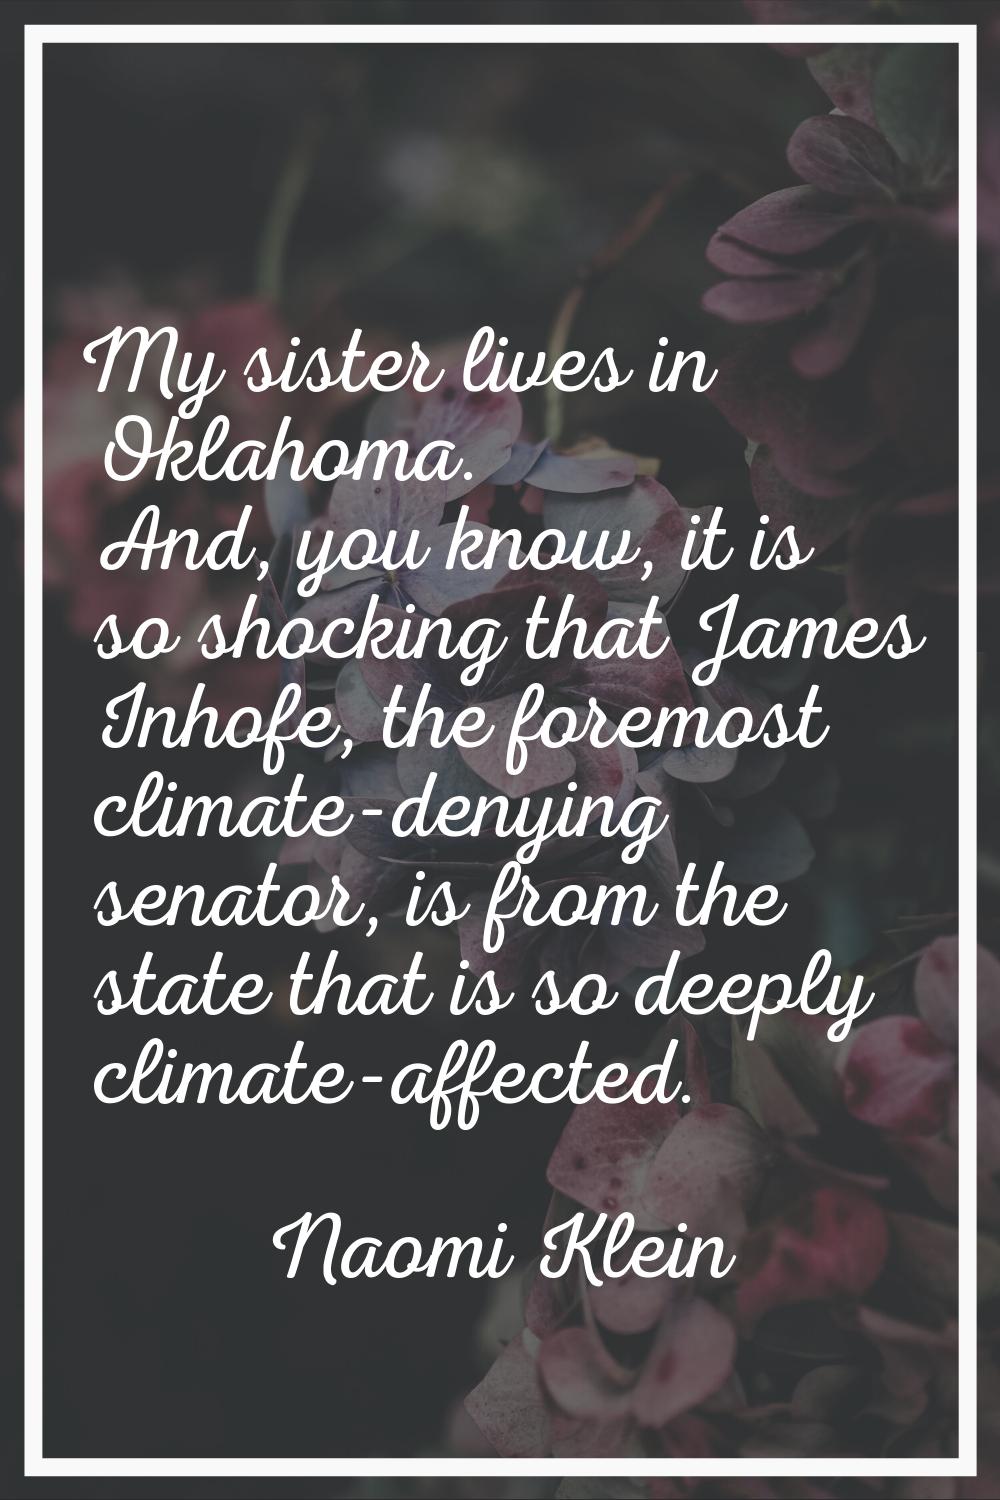 My sister lives in Oklahoma. And, you know, it is so shocking that James Inhofe, the foremost clima